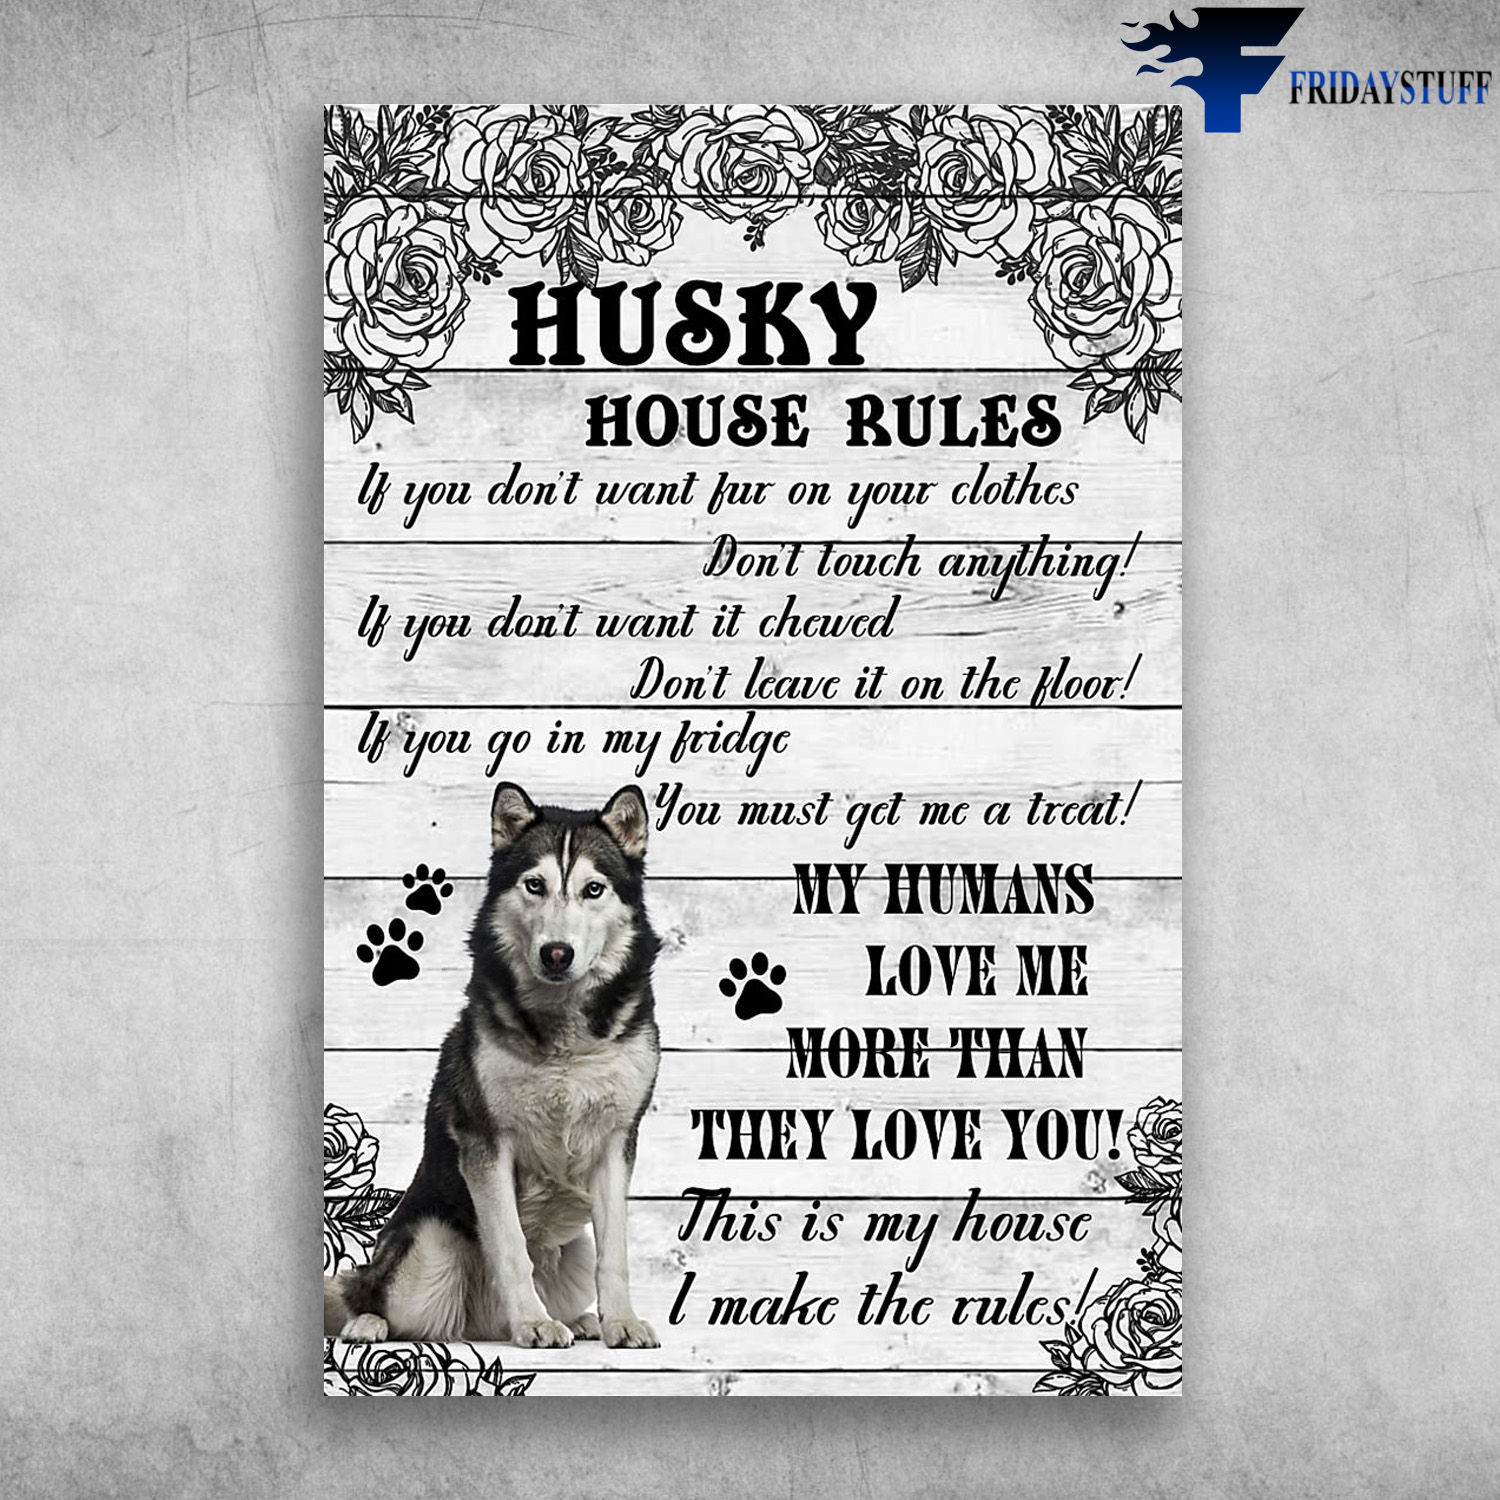 Husky House Rules - If You Don't Want For On Your Clothes, Don't Touch Anything, If You Don't Want It Chewed, Don't Leave It On The Floor, If You Go In My Fridge, You Must Get Me A Treat